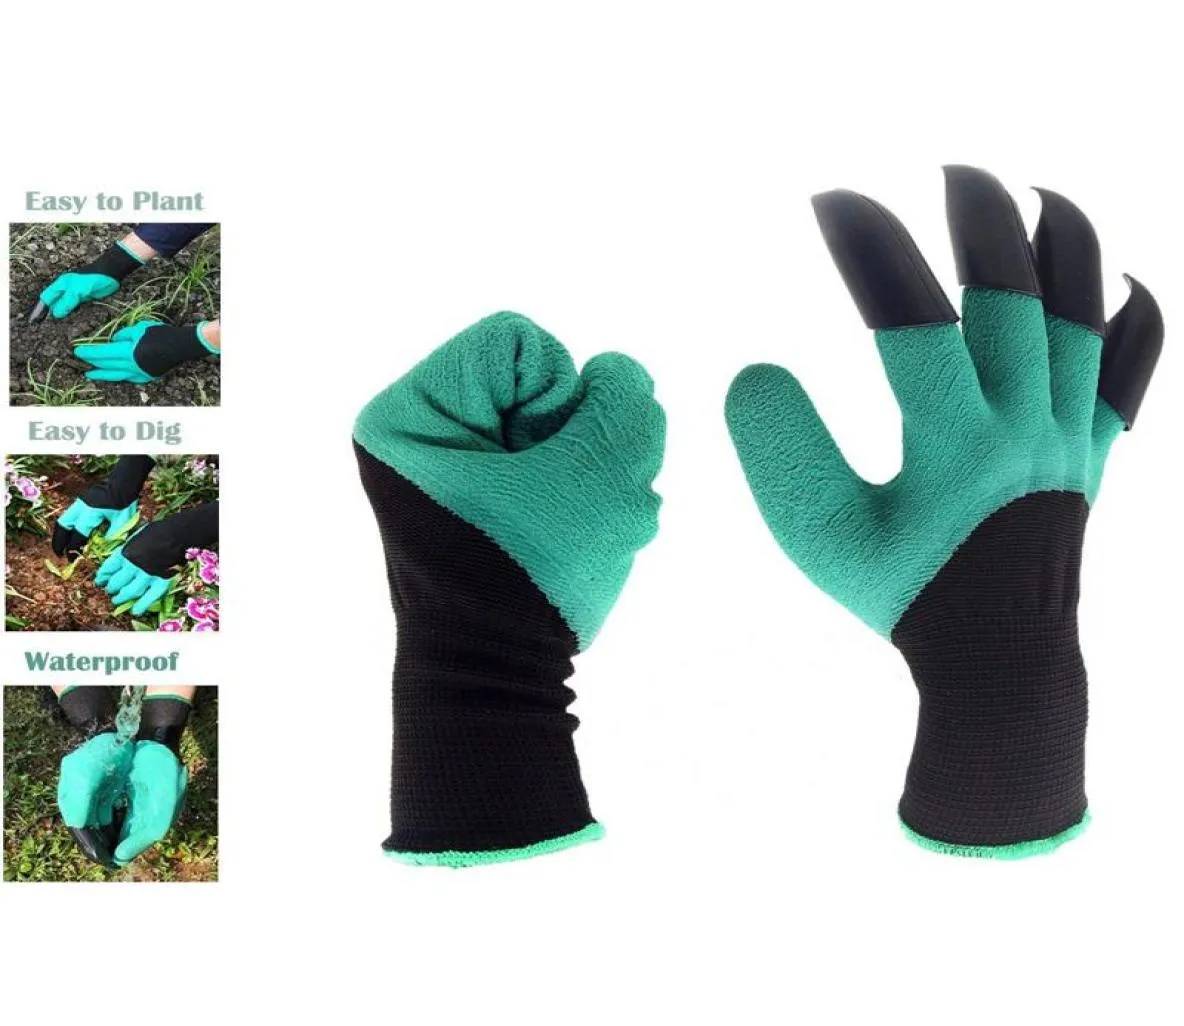 Gardening Gloves garden Digging Planting 4 ABS Plastic Garden Working Accessories Selling New For Digging Planting3553628